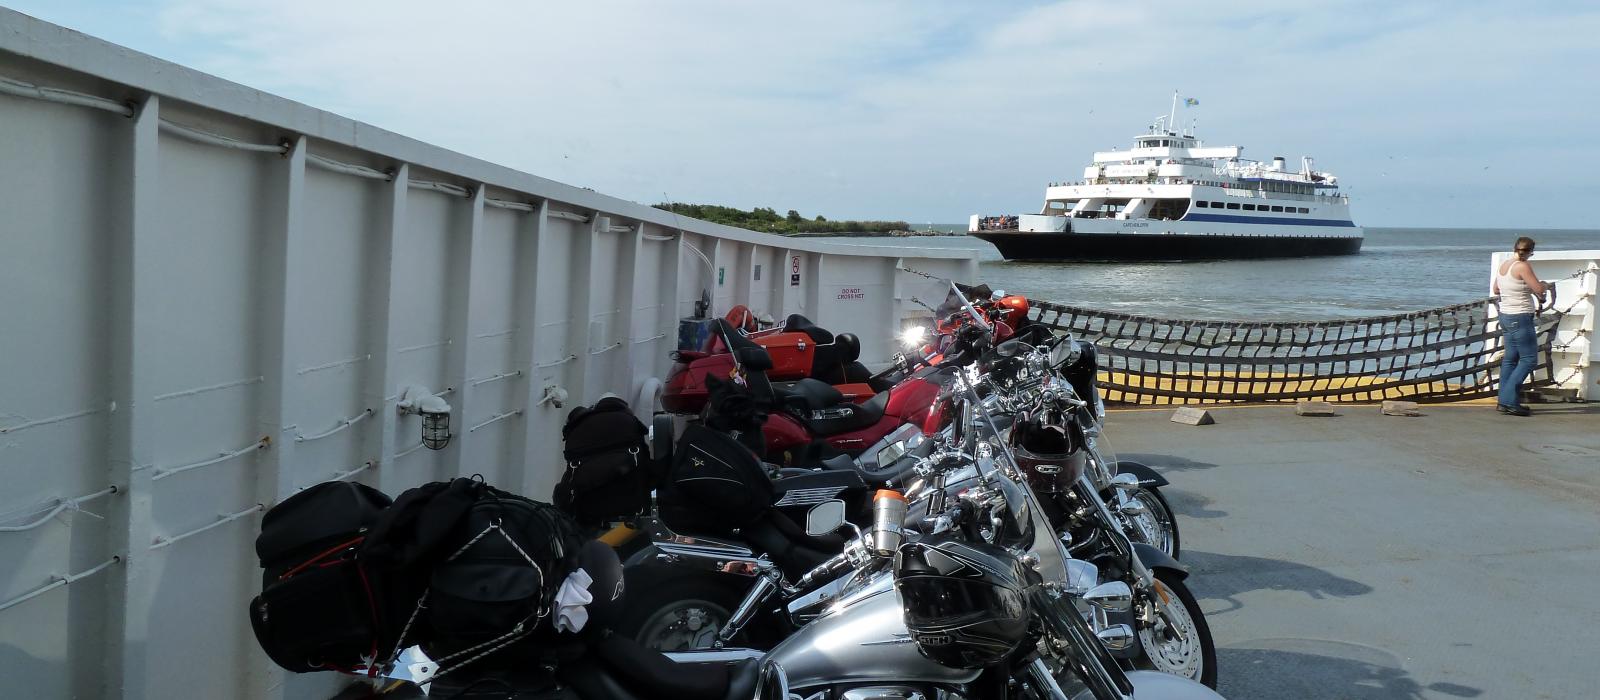 A view of motorcycle shipping methods